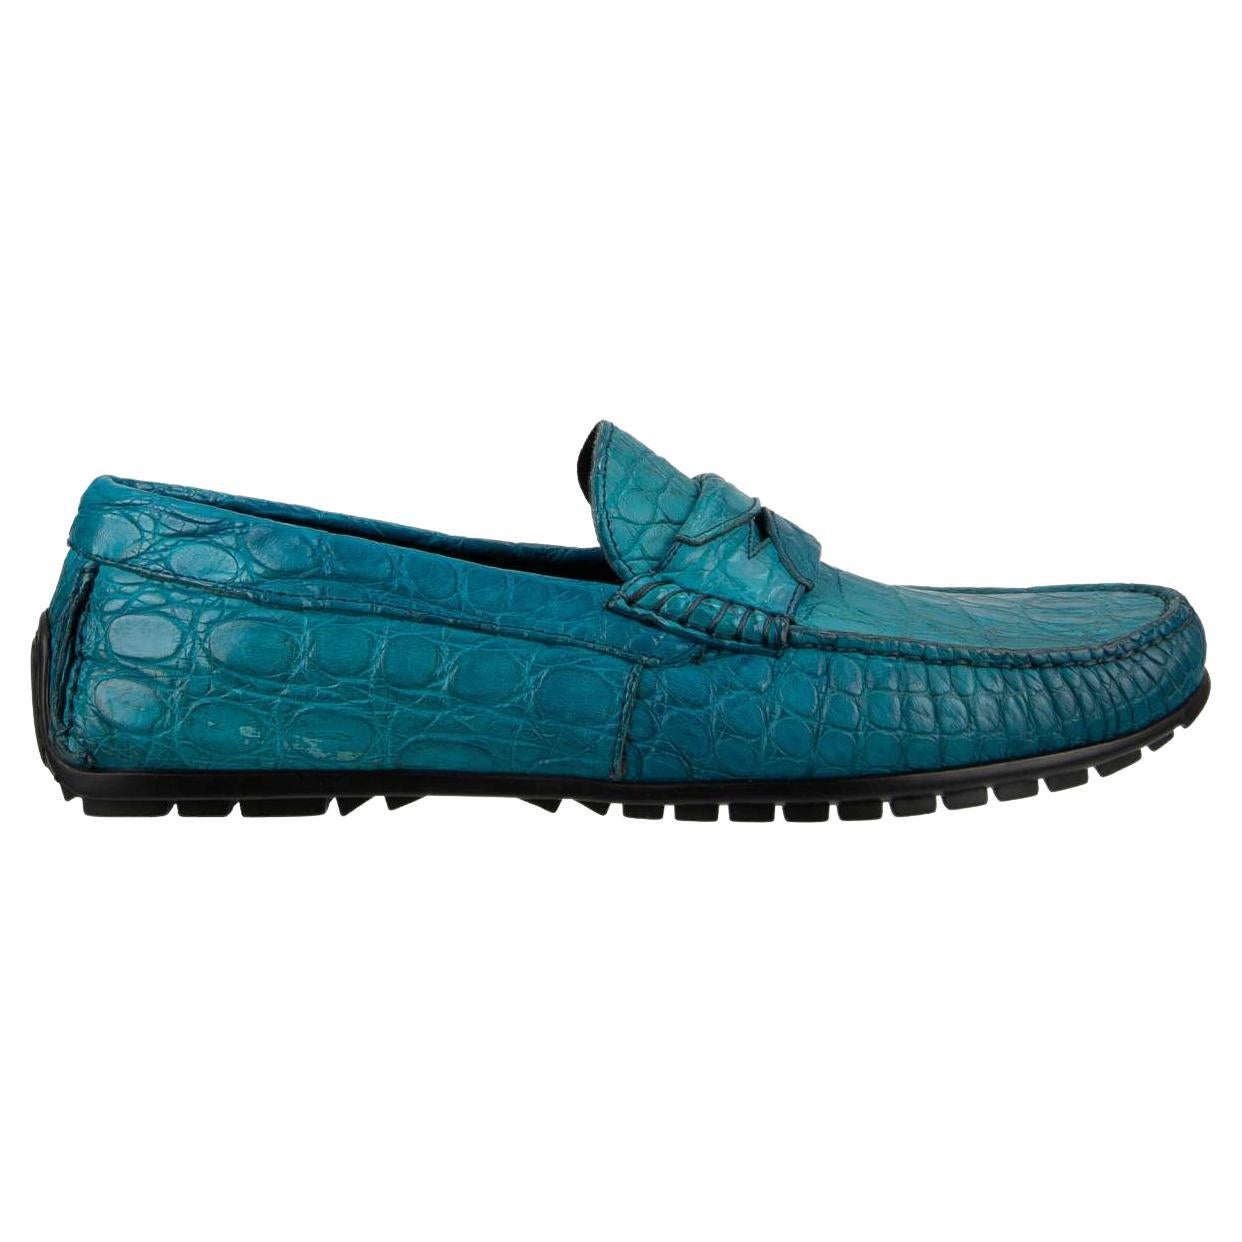 D&G - Caiman Leather Moccasins Loafer Shoes RAGUSA Turquoise Blue EUR 40 For Sale